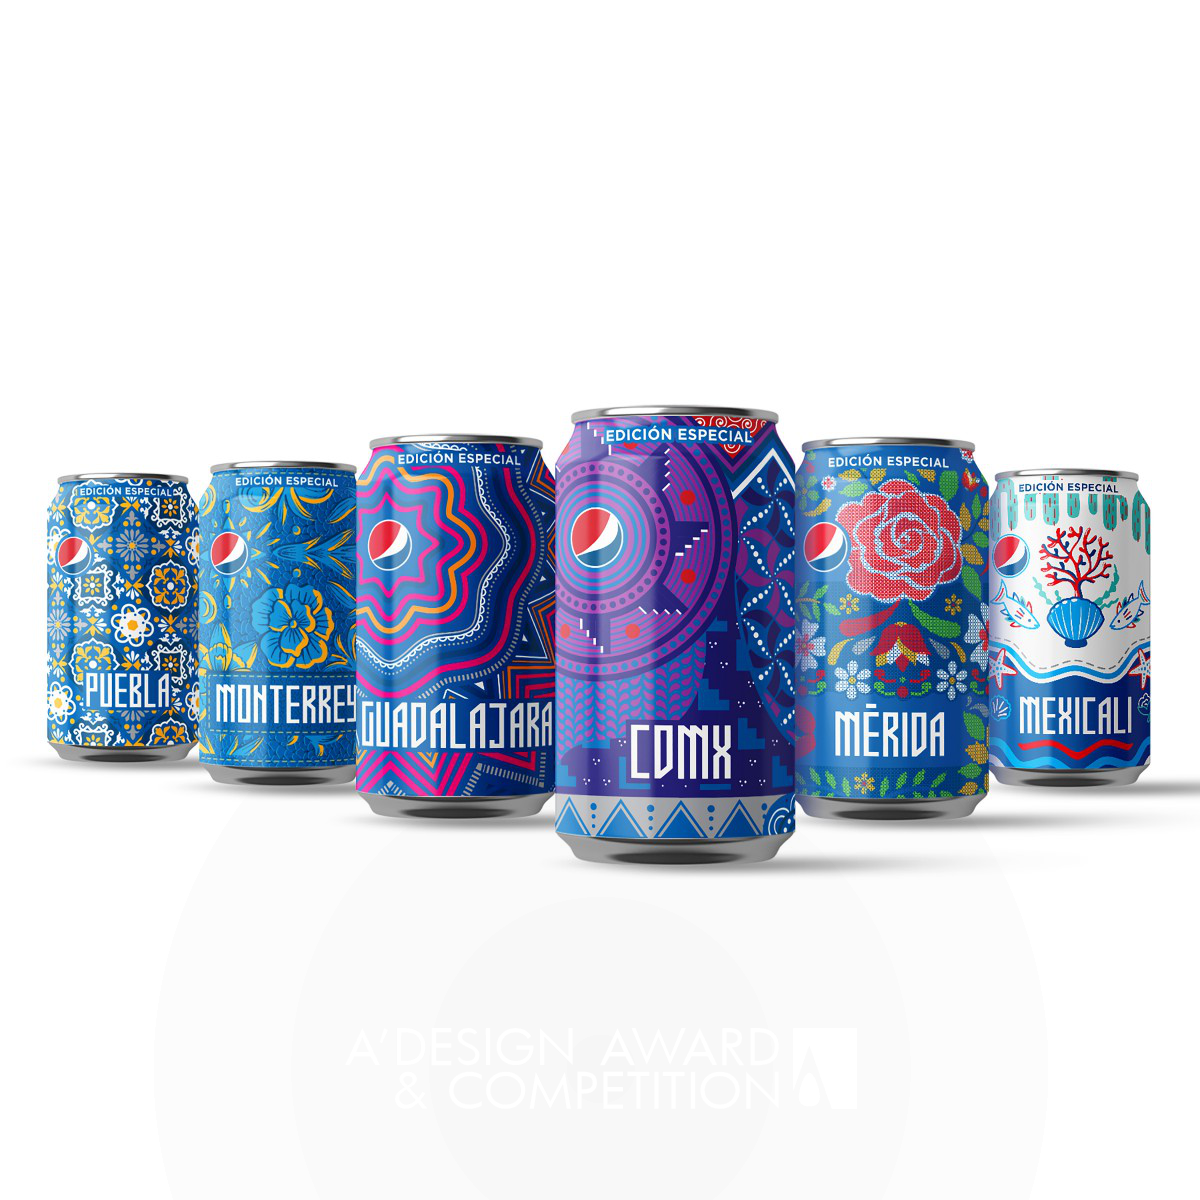 Pepsi Culture Limited Edition Packaging by Dennis Furniss Golden Packaging Design Award Winner 2021 